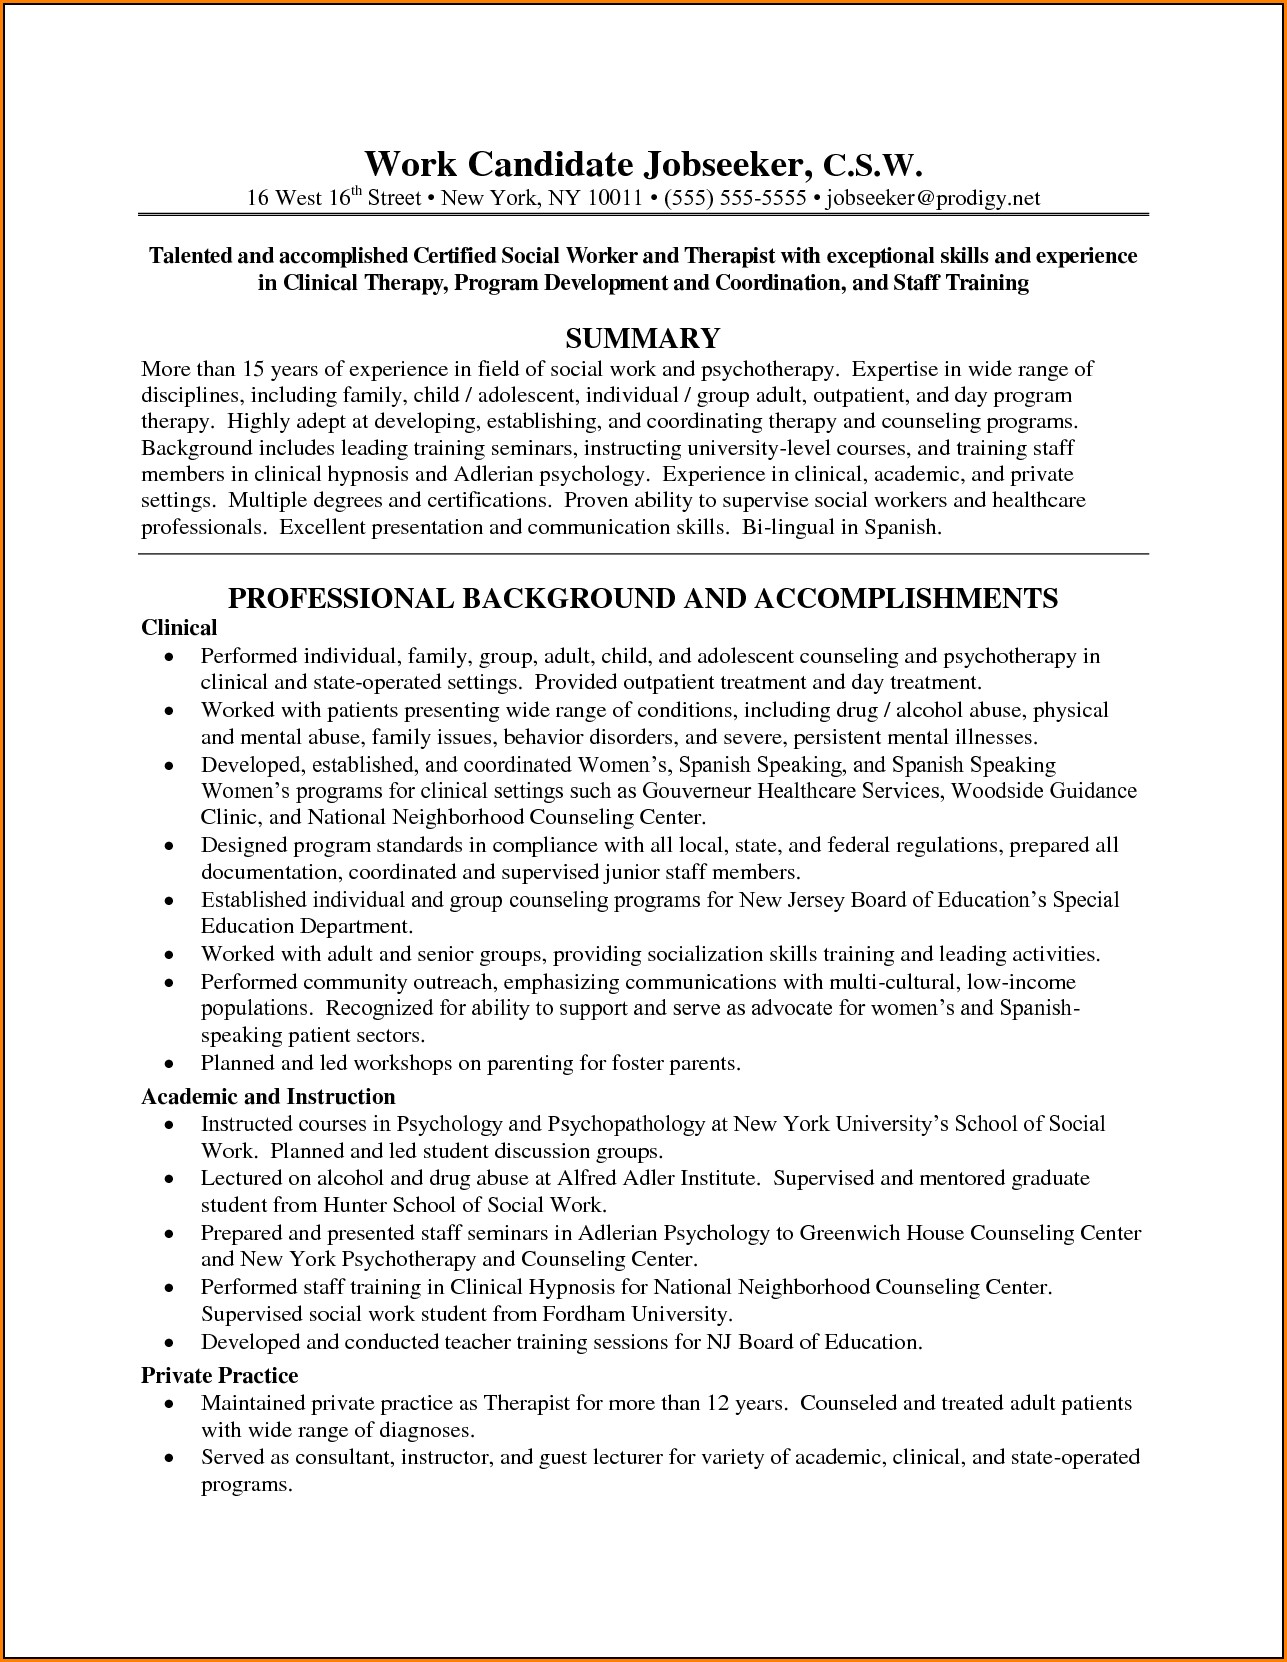 Examples Of Resumes For Warehouse Jobs